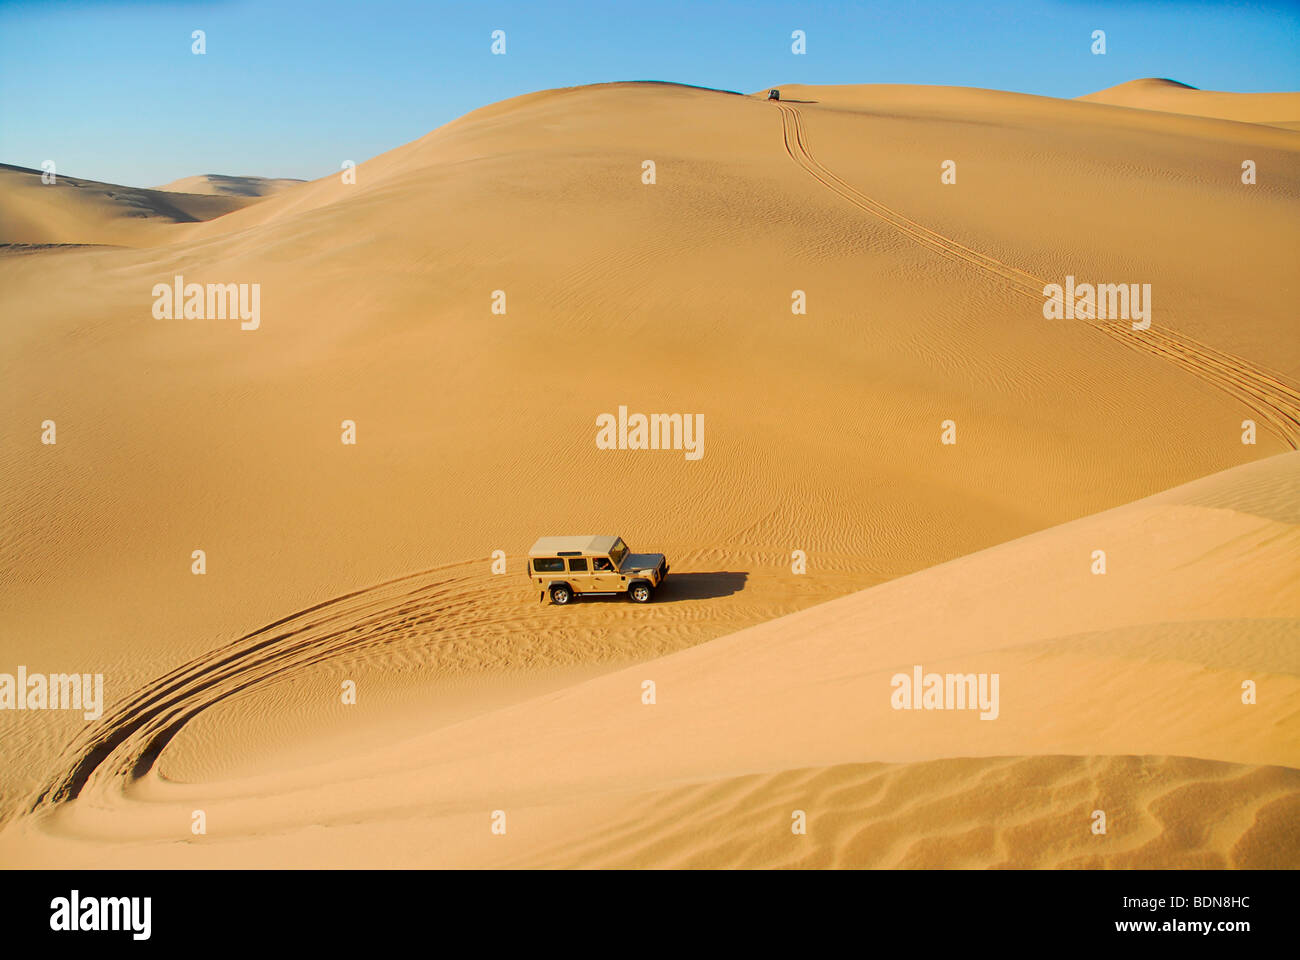 Jeeps in the dunes near Conception Bay, restricted diamond area, Namibia, Africa Stock Photo